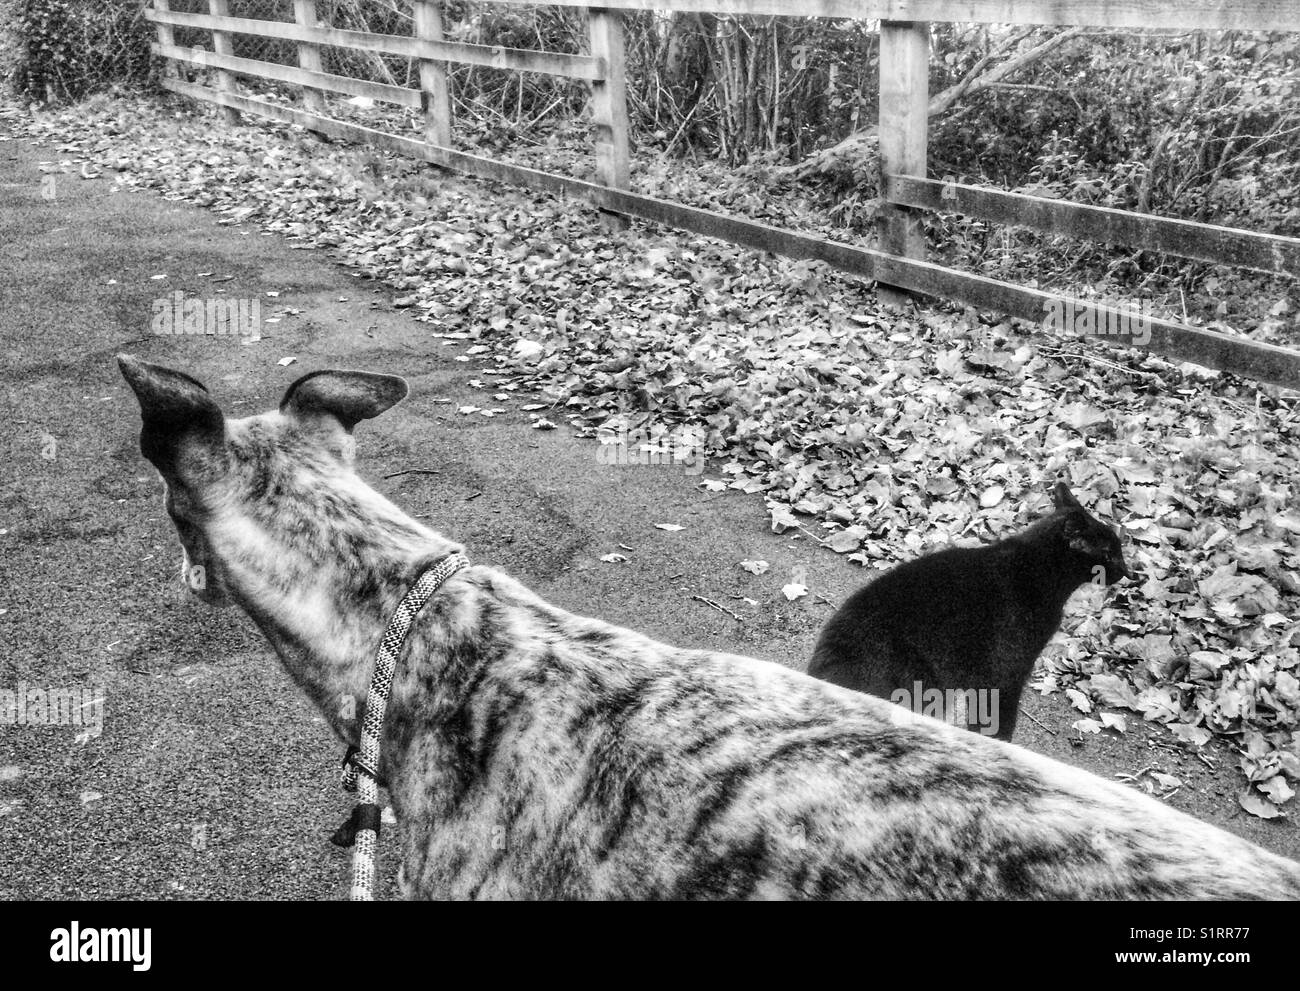 Black cat loves following a greyhound dog for a walk through a nature path during autumn at Llanelli, Carmarthenshire. Black and white. Stock Photo